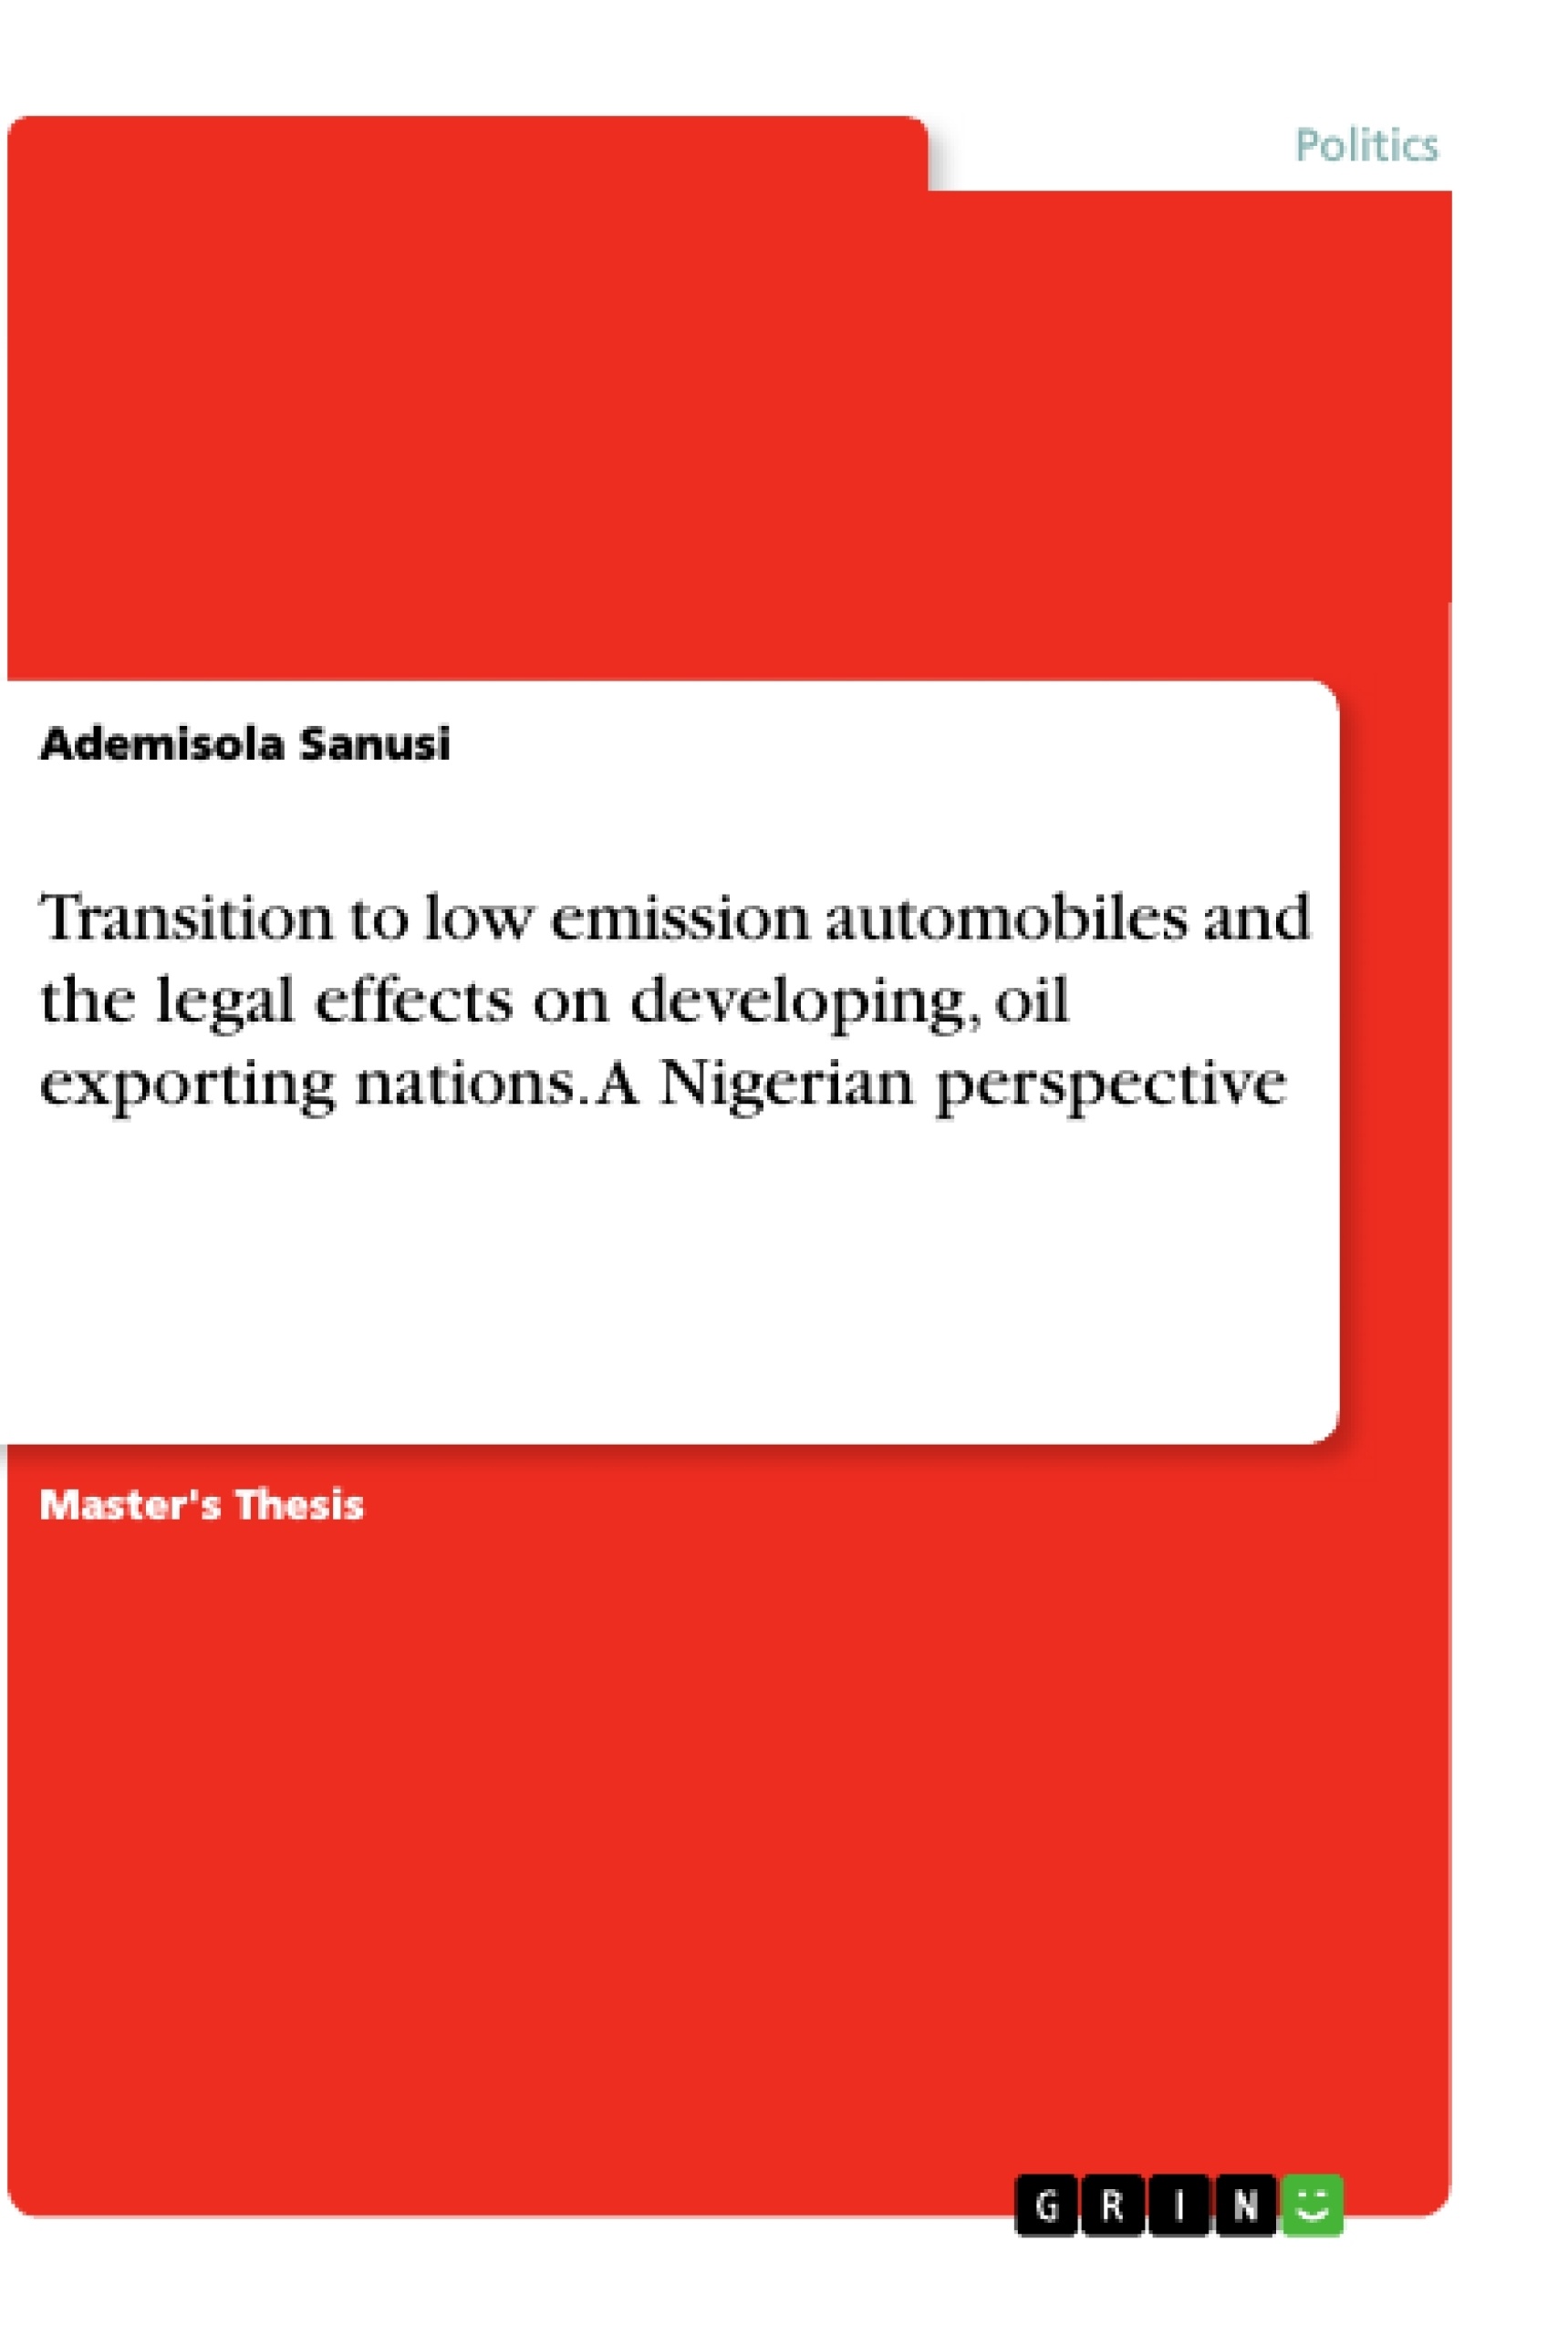 Title: Transition to low emission automobiles and the legal effects on developing, oil exporting nations. A Nigerian perspective